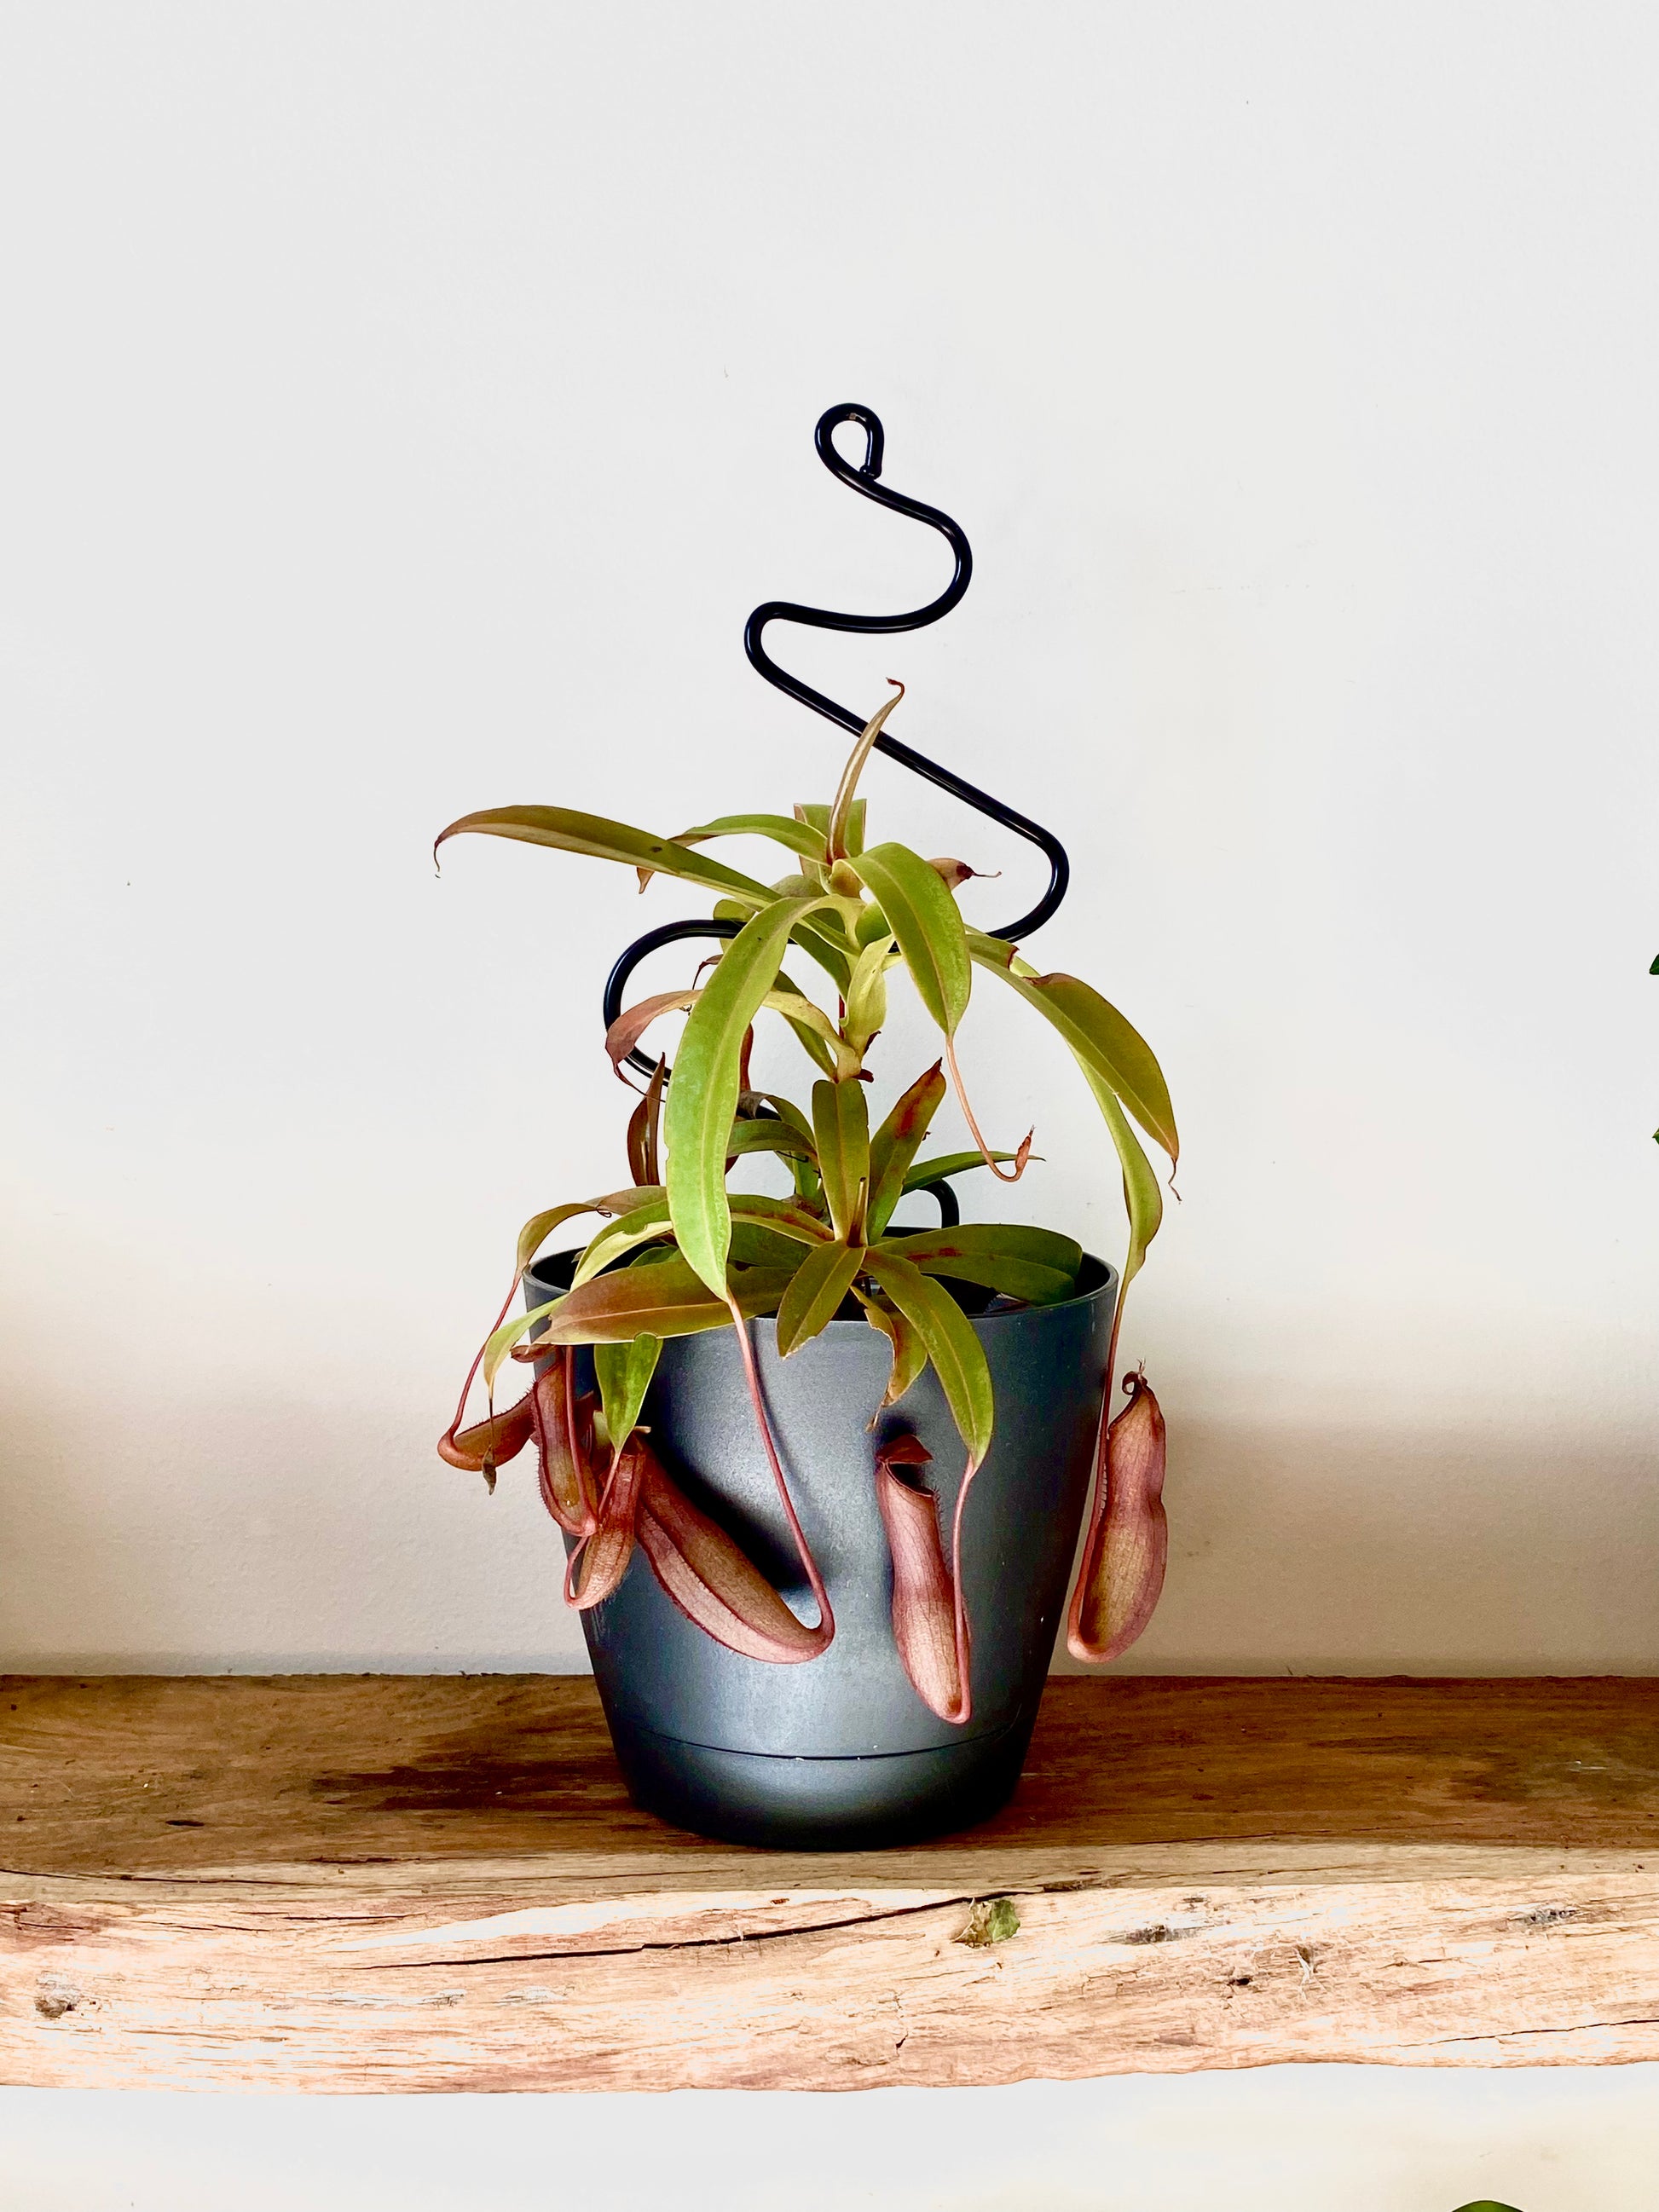 a carnivorous pitcher plant (nepenthes) with long green leaves and red/brown pitchers is climbing up a black squiggle shape trellis in a black plastic pot